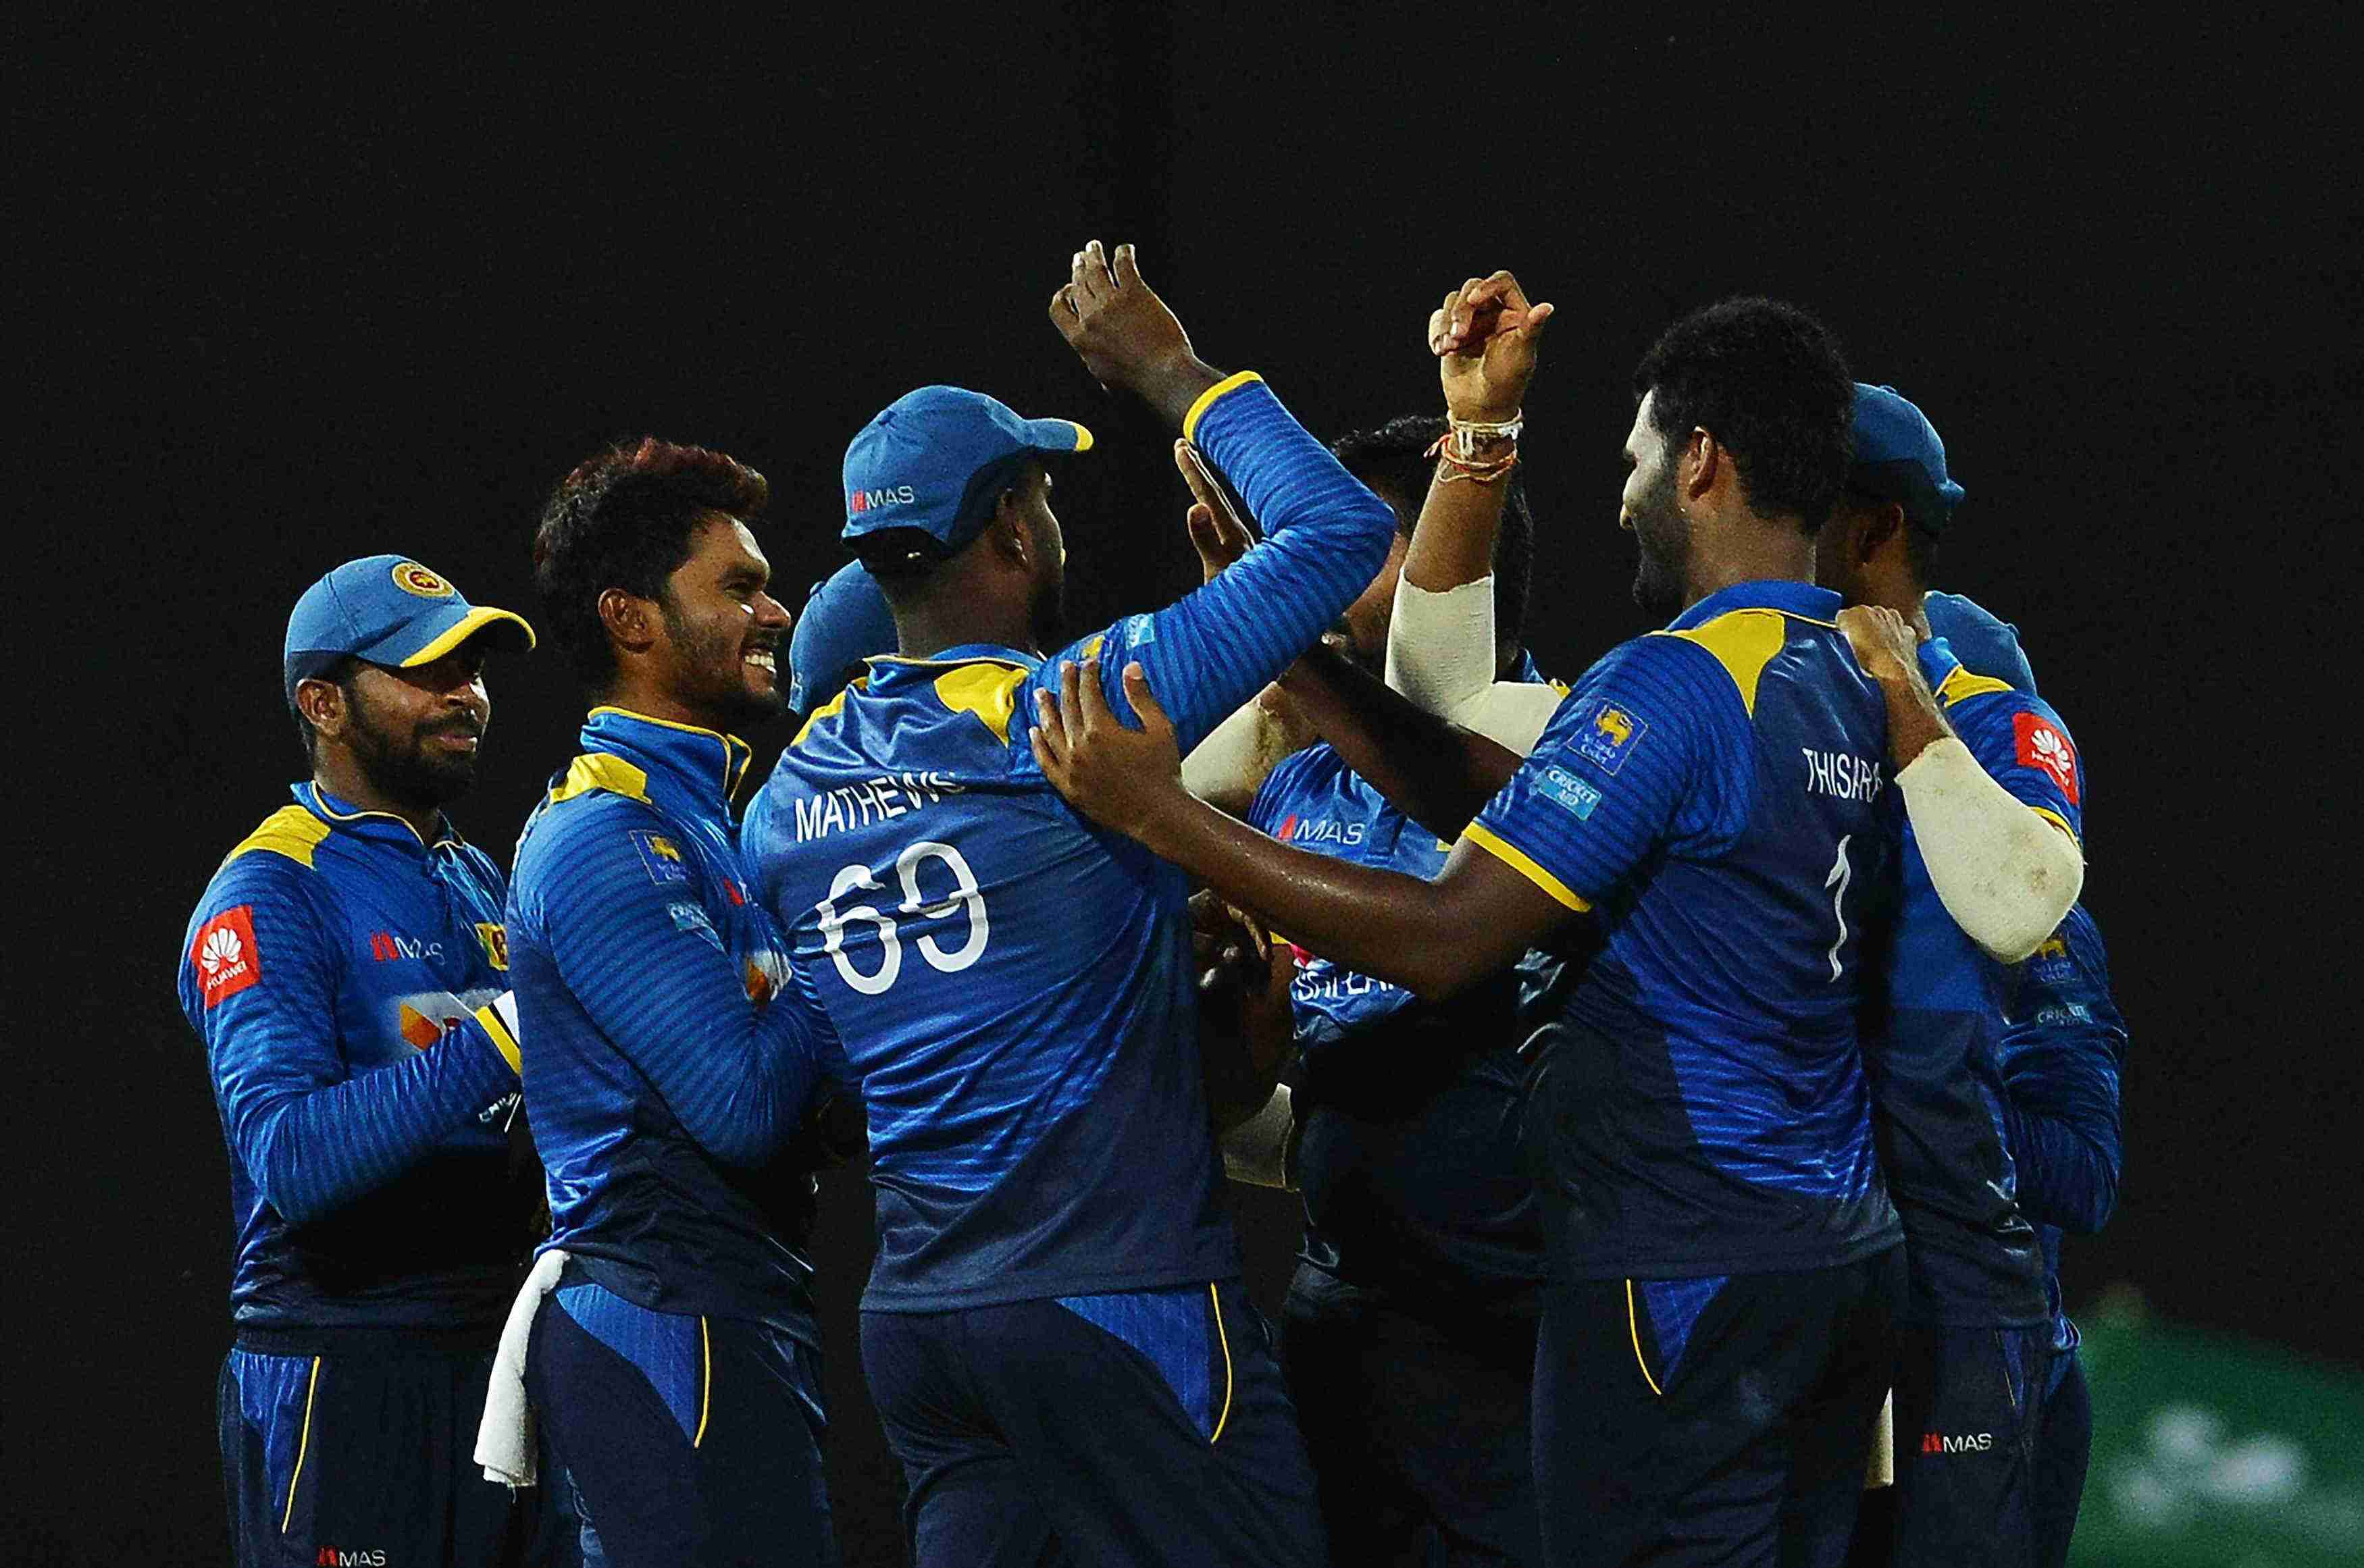 South Africa, West Indies or Sri Lanka: Who will Qualify for World Cup 2023?